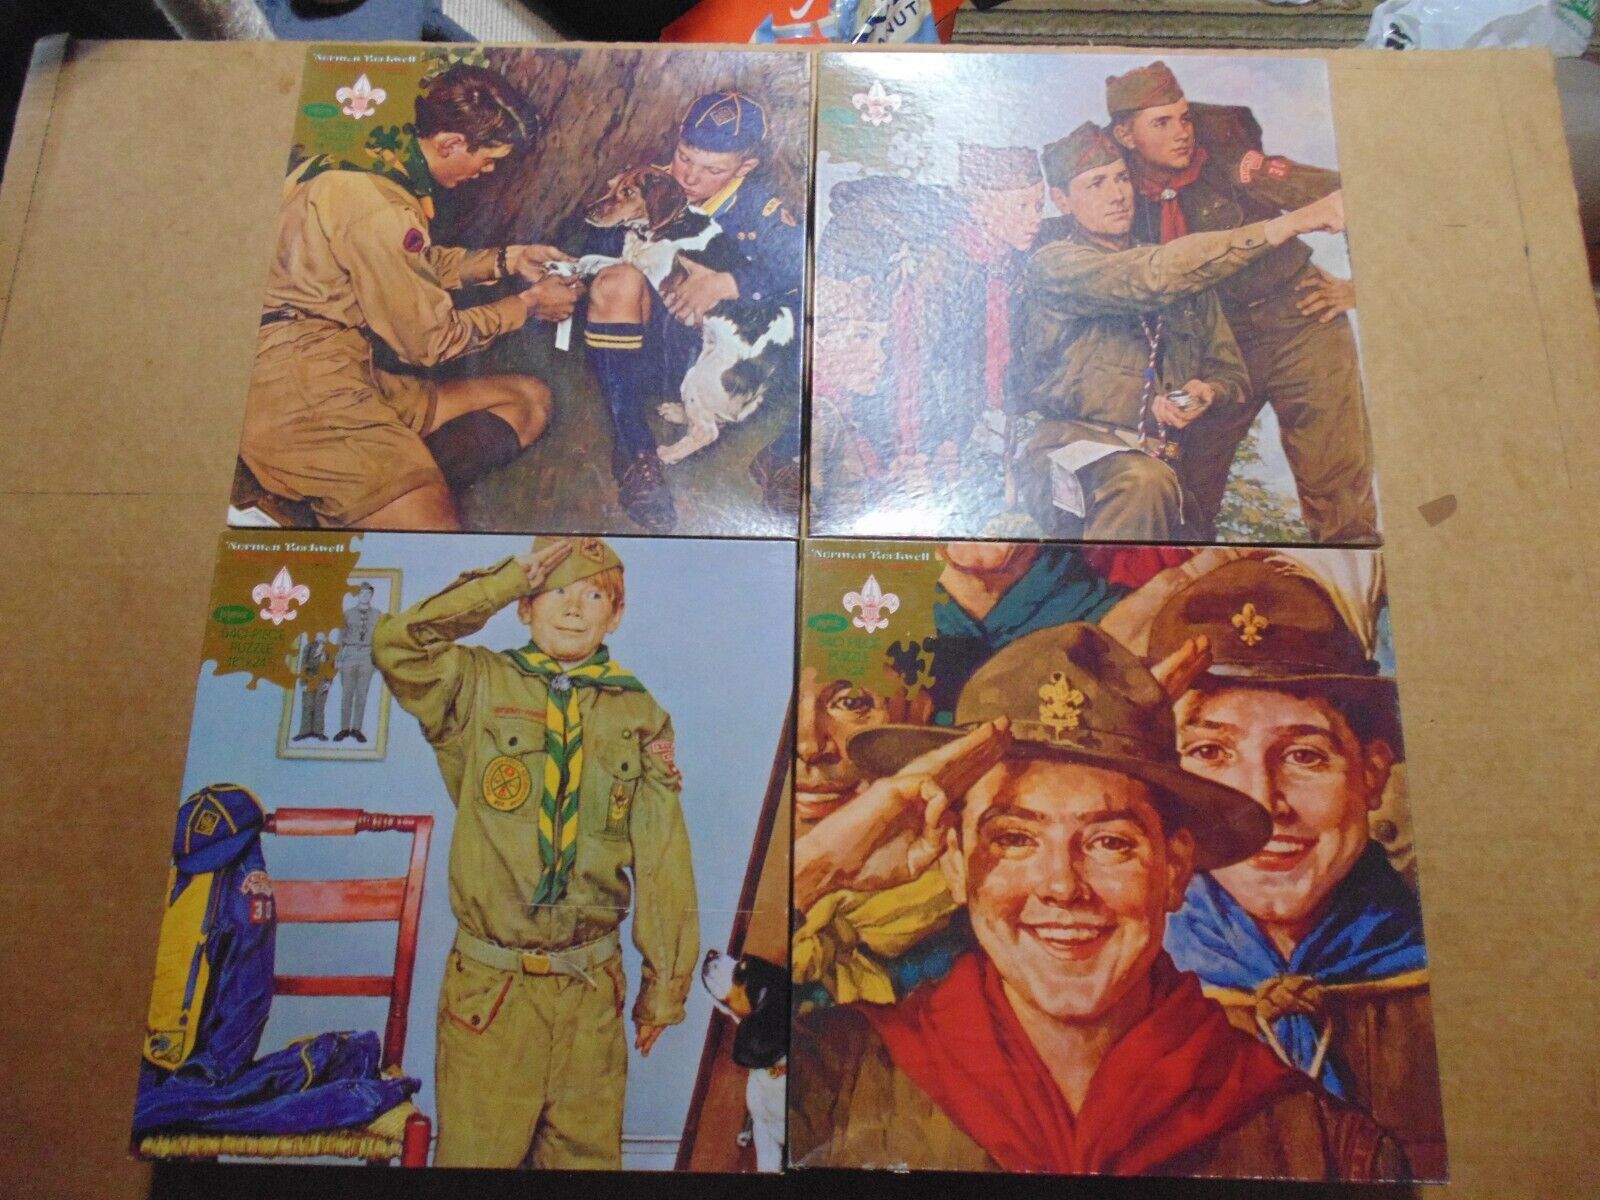 Lot Of 4 Jaymar Norman Rockwell Boy Scouts of America 540 Piece Jigsaw Puzzles